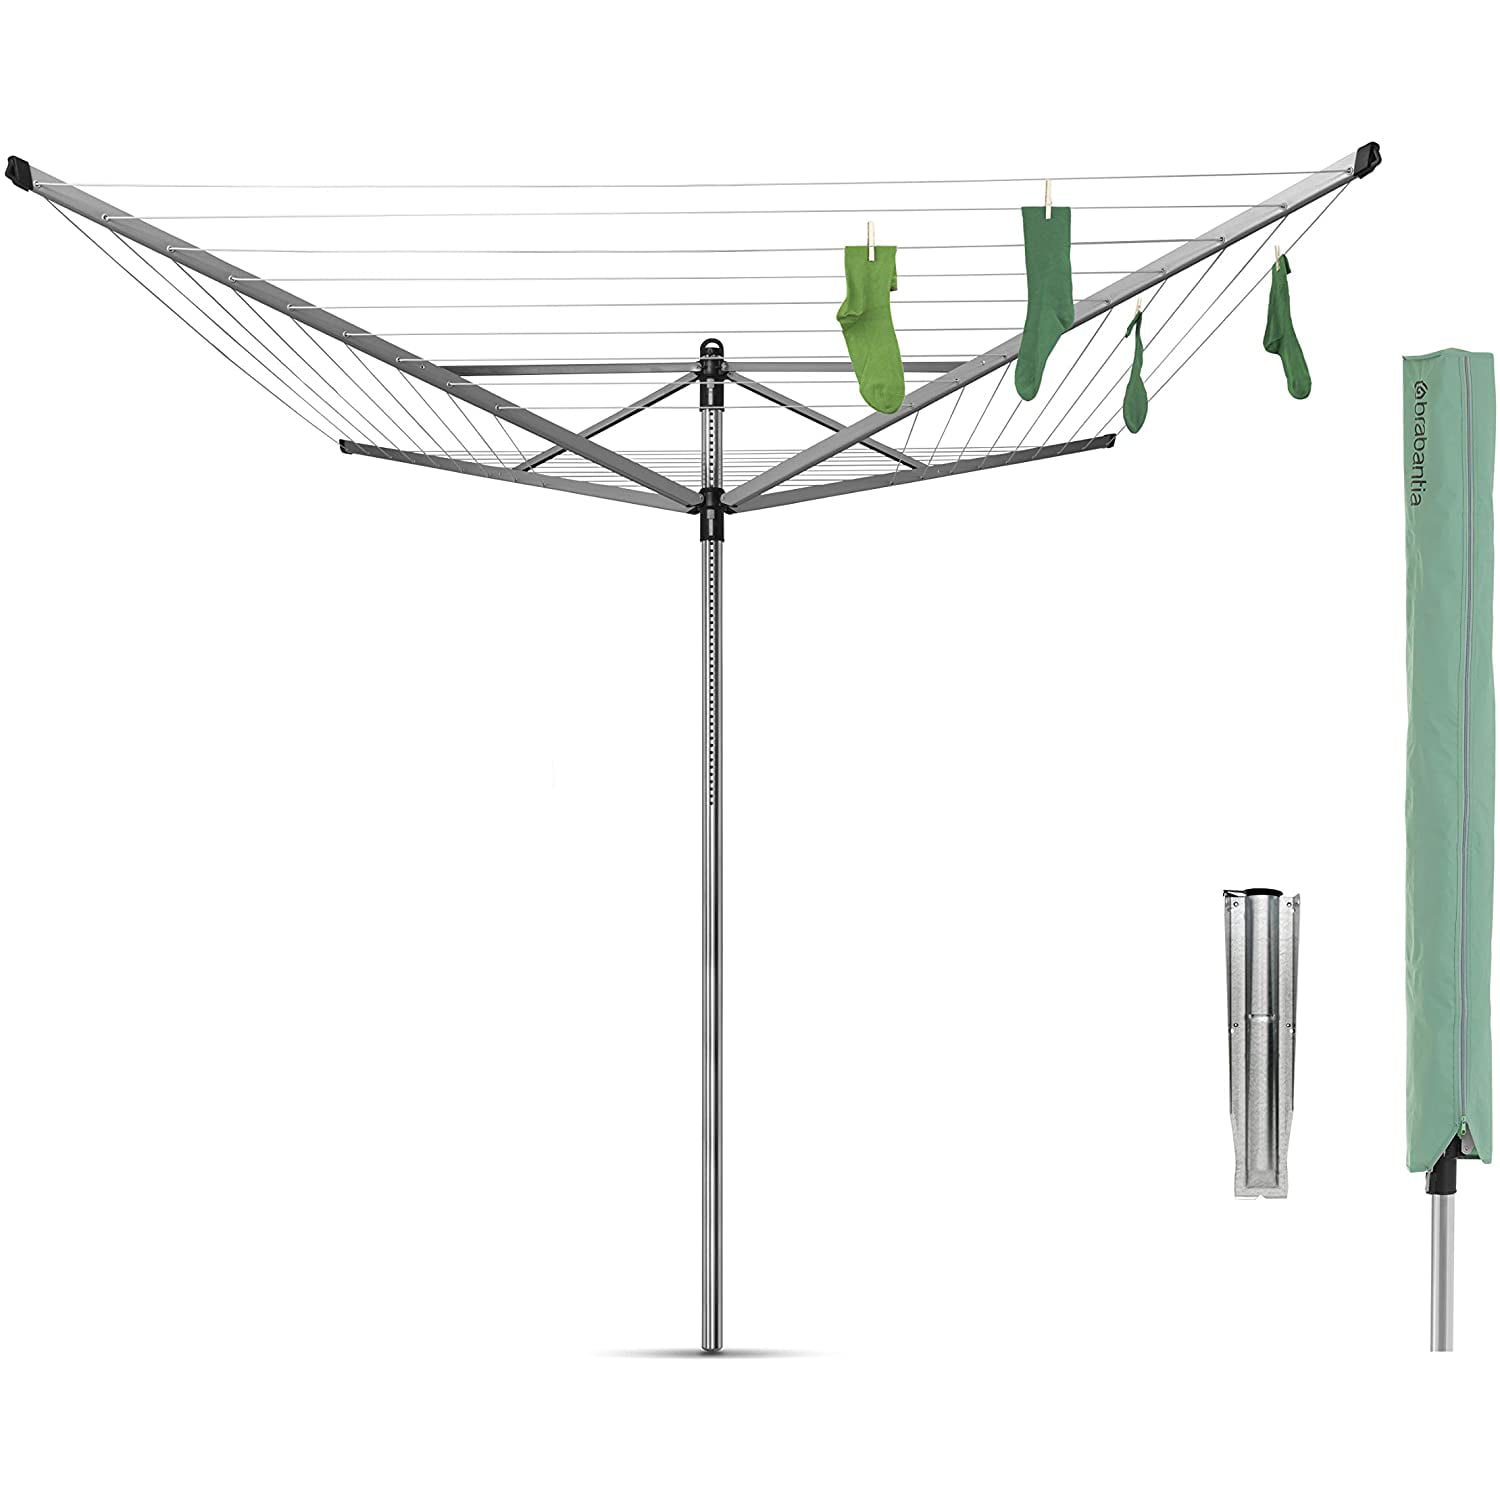 JVL ROTARY 3 ARM FREE STANDING GARDEN LAUNDRY 16M WASHING LINE CLOTH DRIER AIRER 